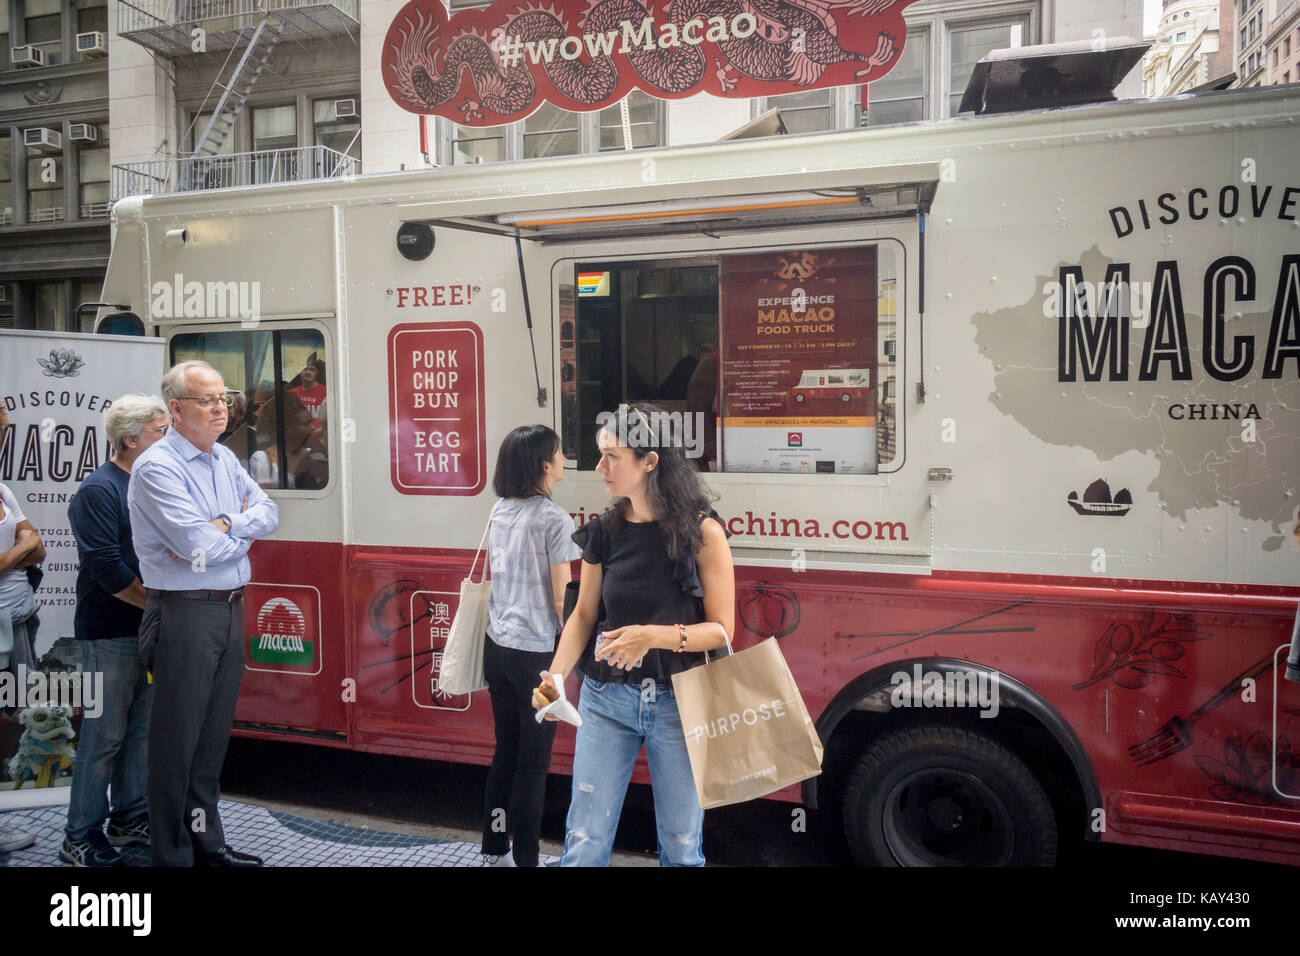 A food truck distributes samples of cuisine from Macao in New York on Tuesday, September 19, 2017 during a branding event for Macao Tourism. Macao is an autonomous region of China and was a Portuguese colony until it was returned to China on December 20, 1999. The Macao tourism office was promoting visits to the city touting the cuisine and the Portuguese influences. (© Richard B. Levine) Stock Photo